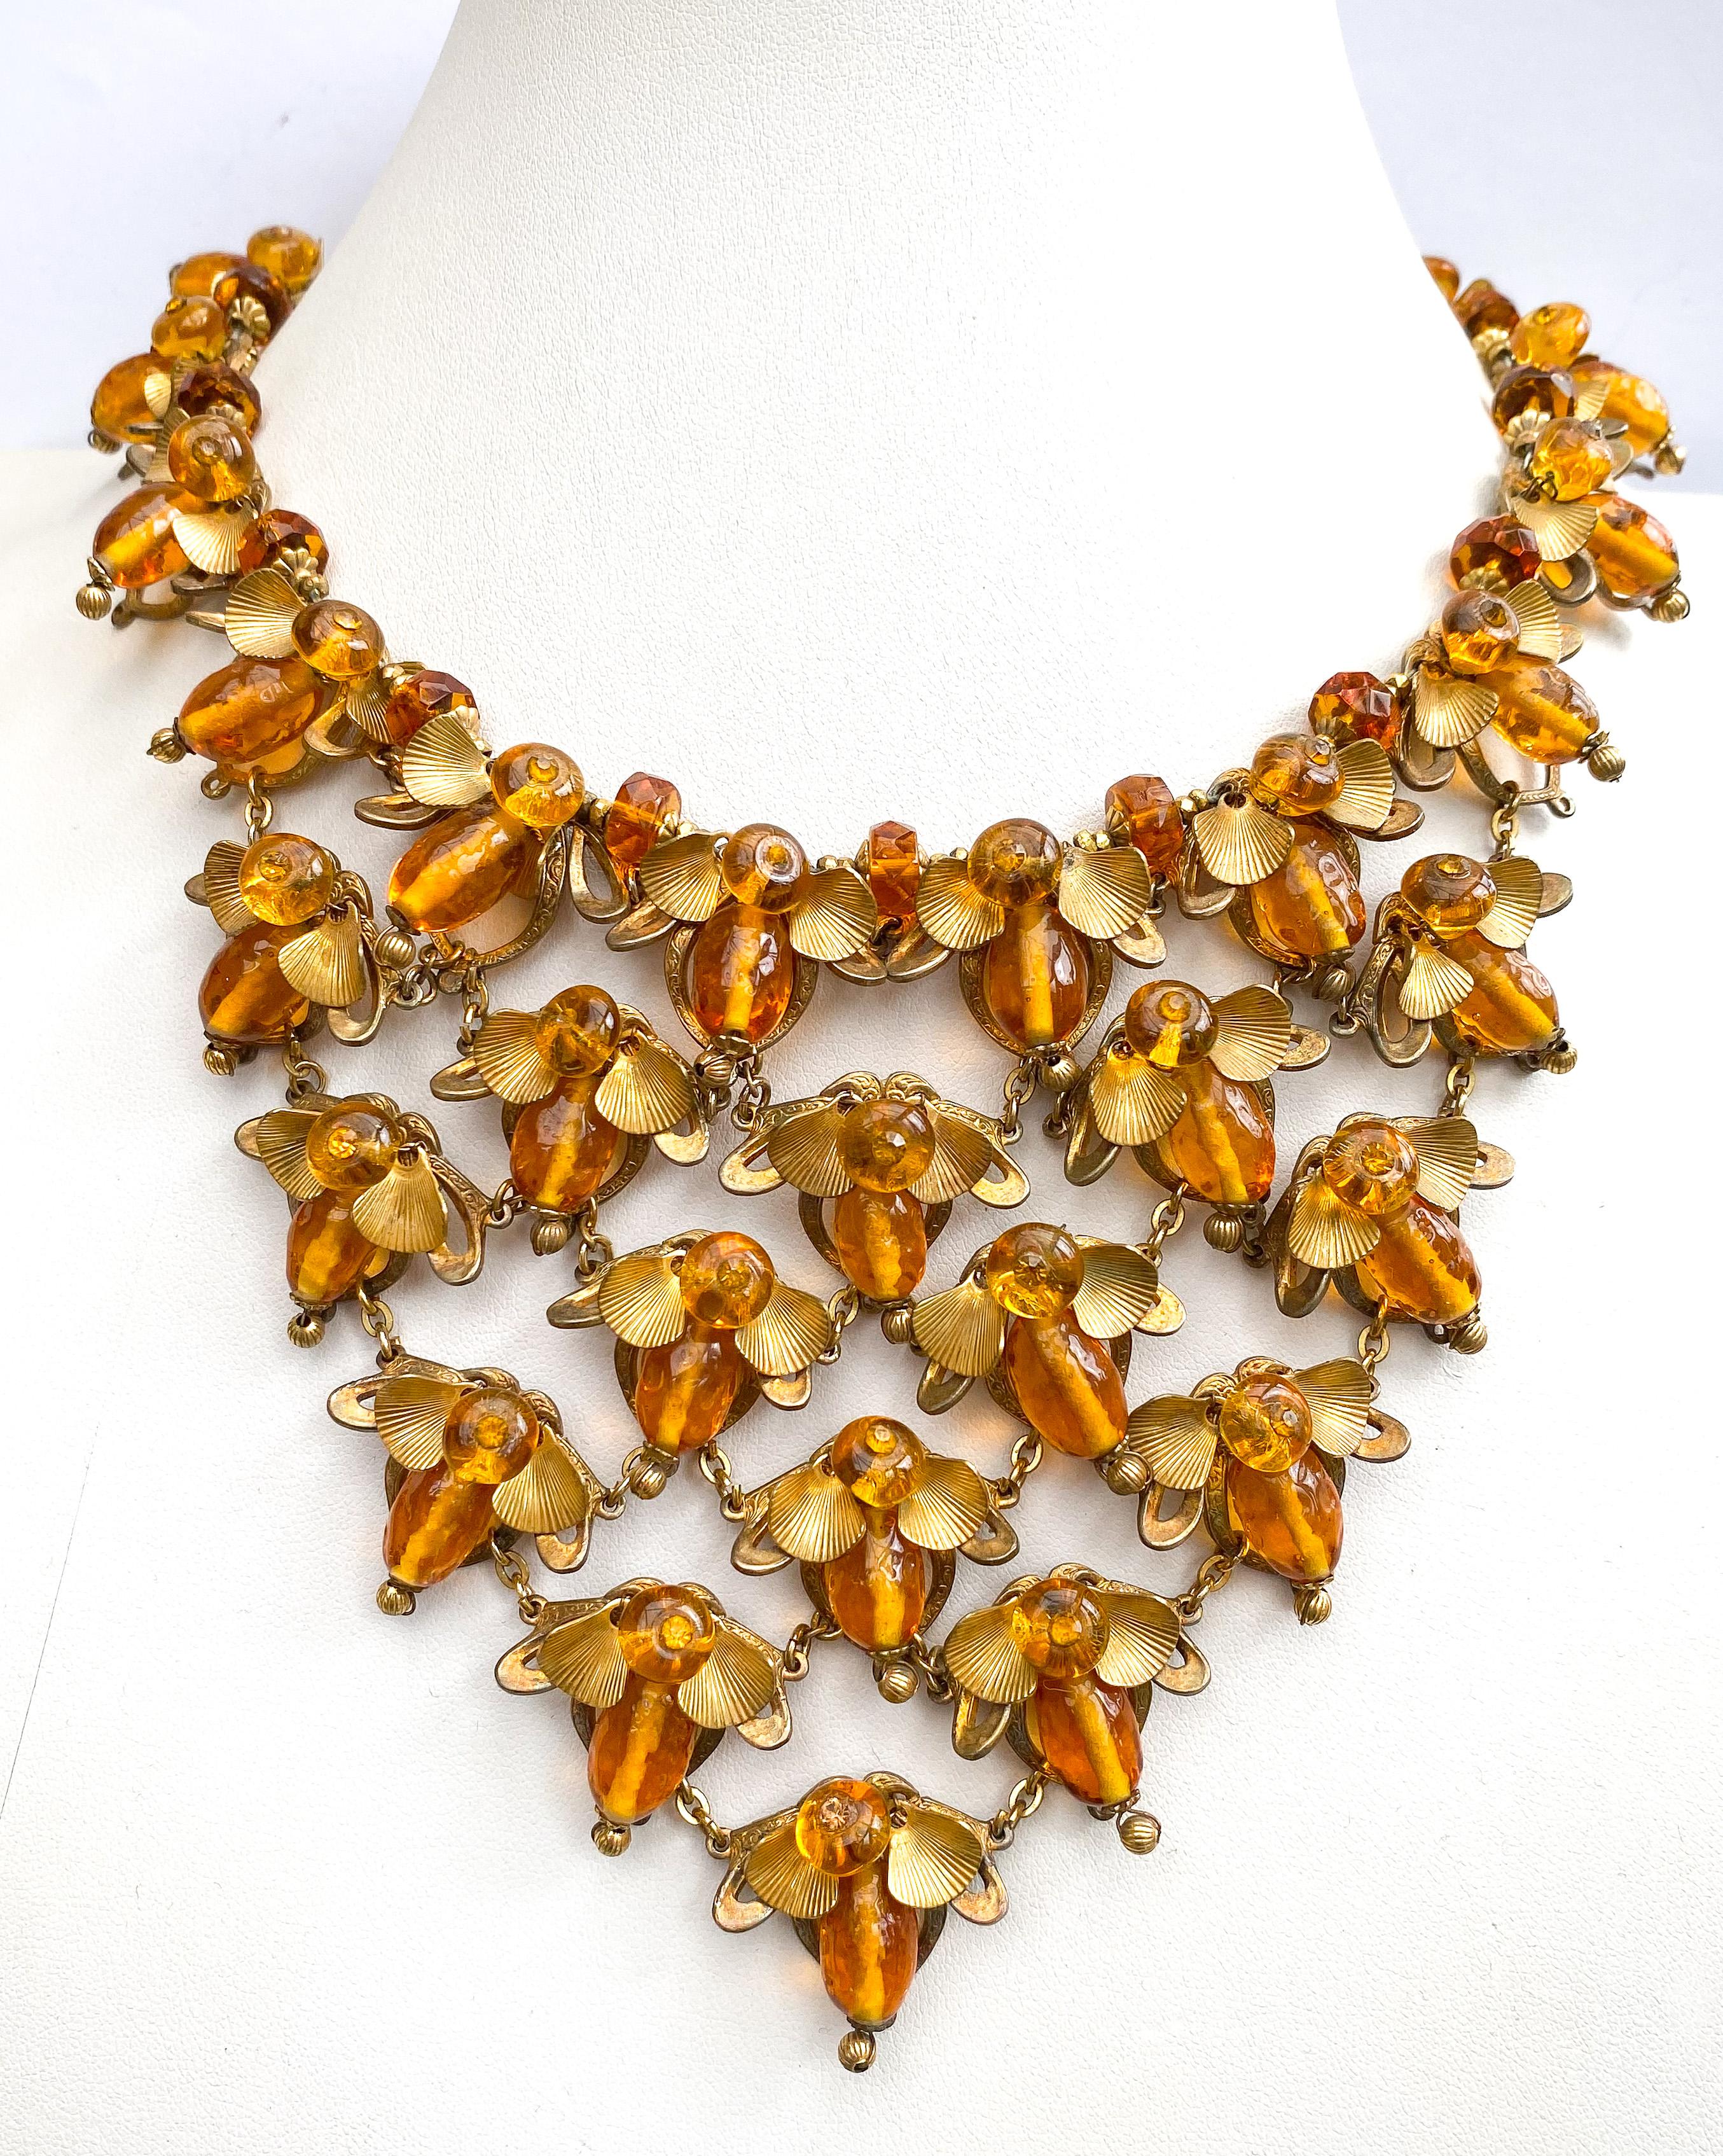 A magnificent topaz glass bead necklace, with 'bee' motif, Miriam Haskell, c1965 For Sale 2